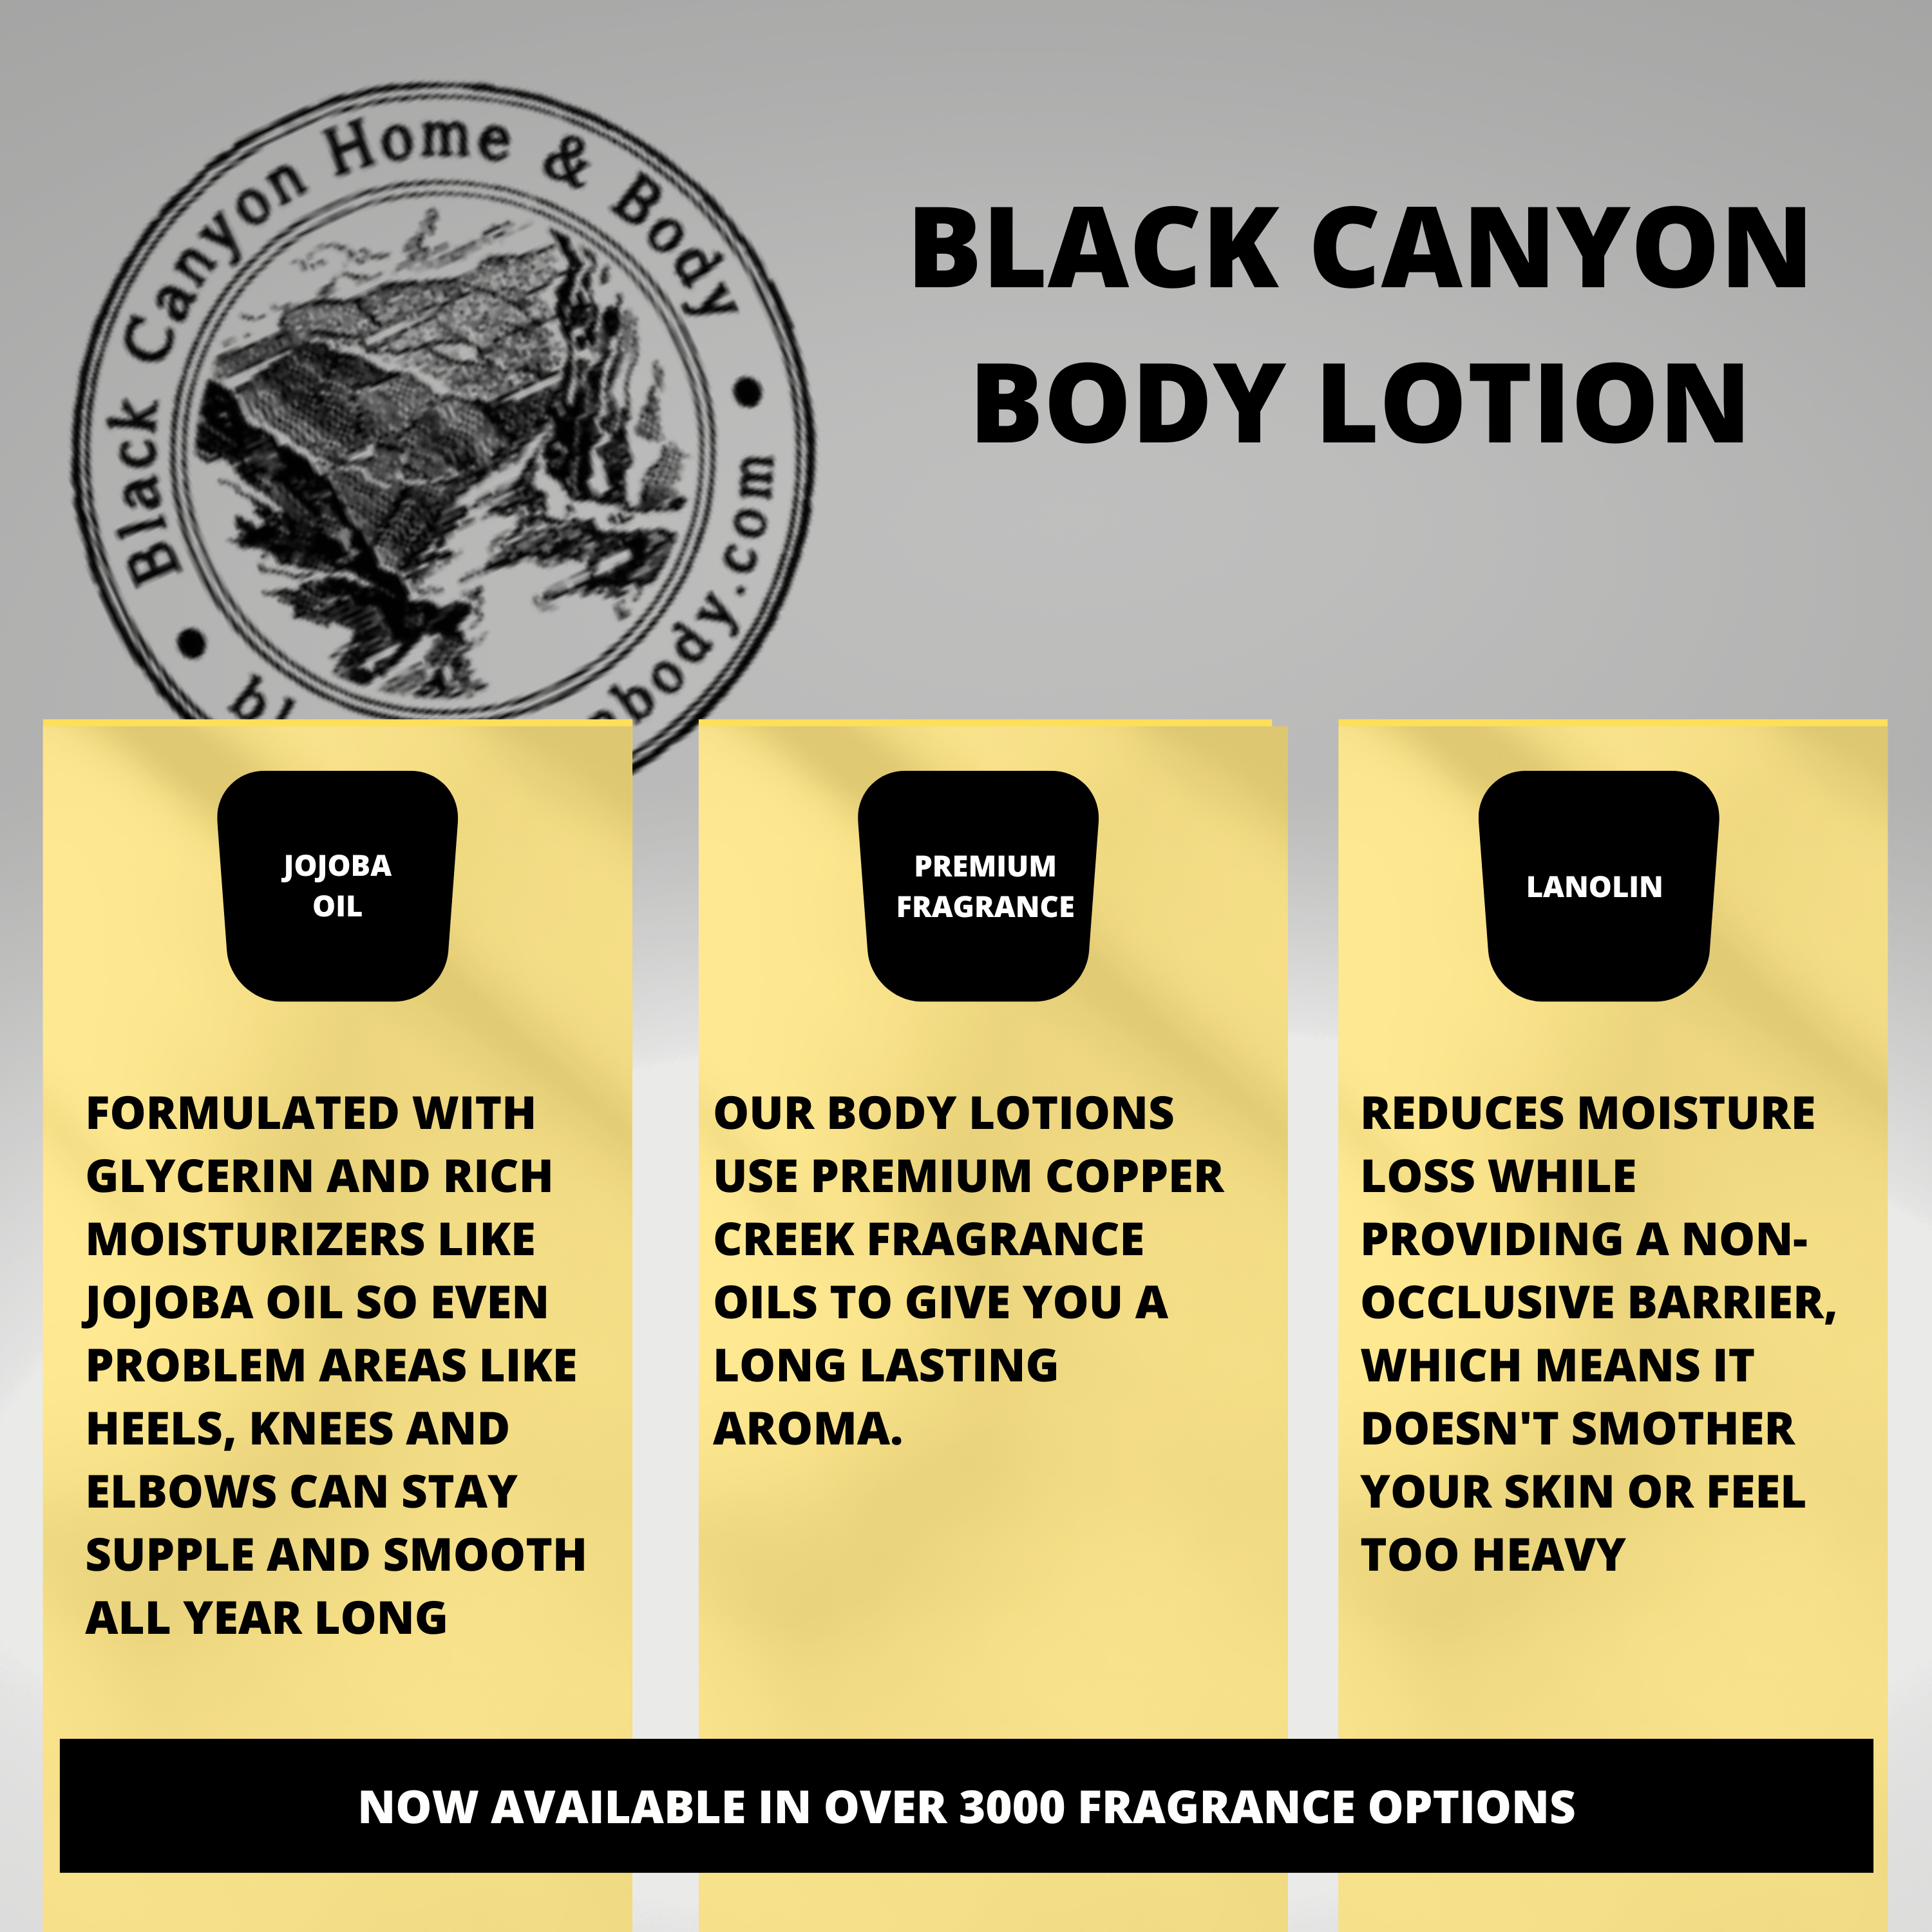 Black Canyon Waterlily & Watermelon Scented Luxury Body Lotion with Lanolin and Jojoba Oil